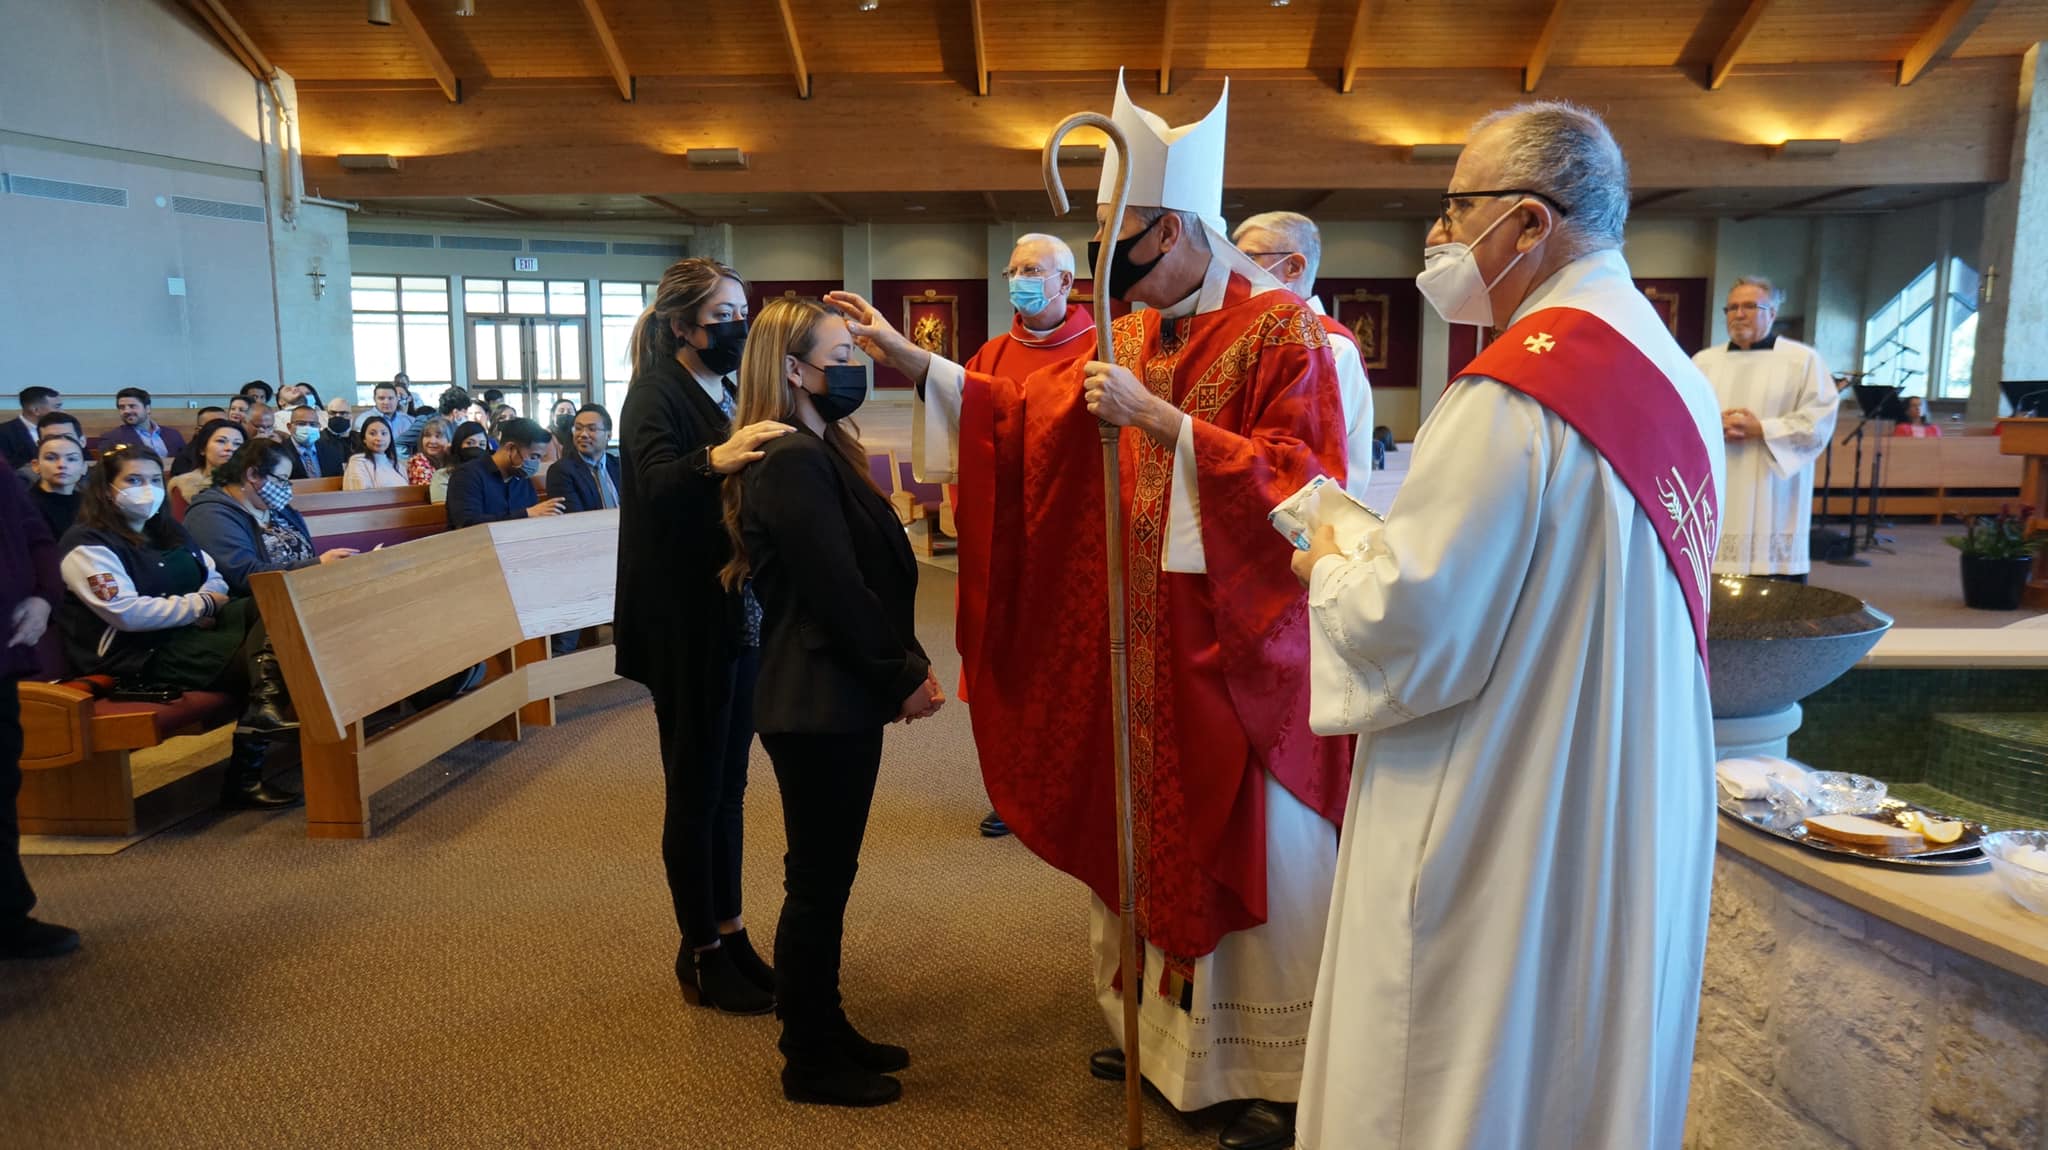 Adults confirmed at liturgy at St. Anthony Mary Claret Church